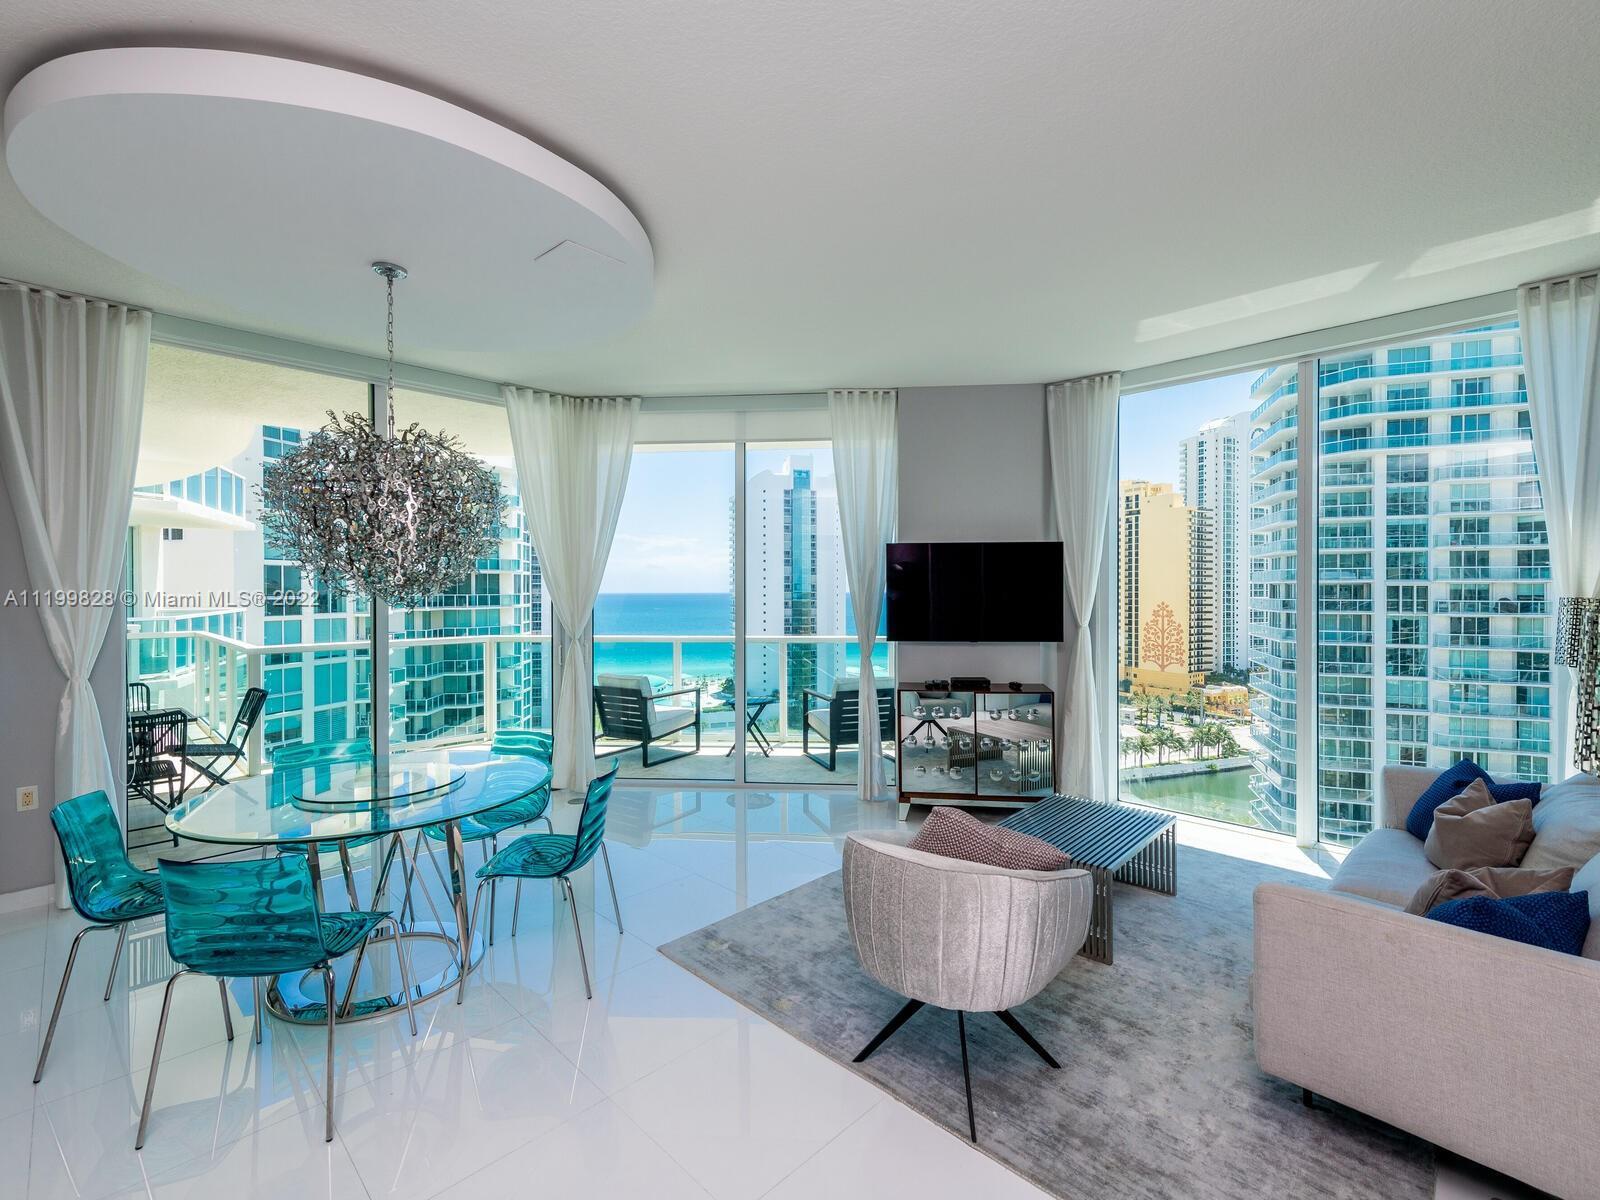 Spectacular 3 bedrooms 2 bathrooms in the desirable Sunny Isles Beach. One of the best and most desi